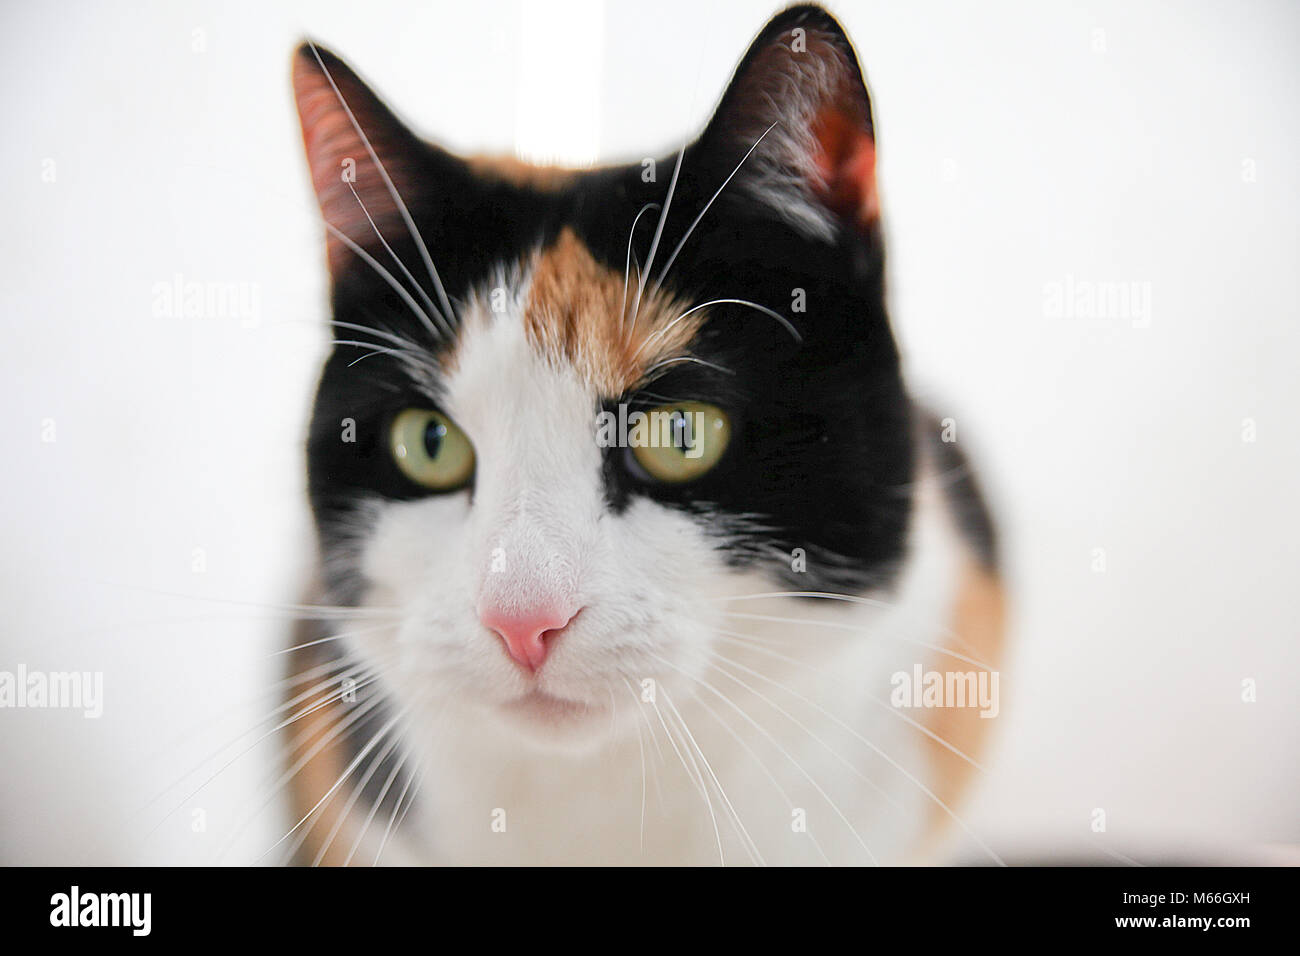 live as a cat Stock Photo